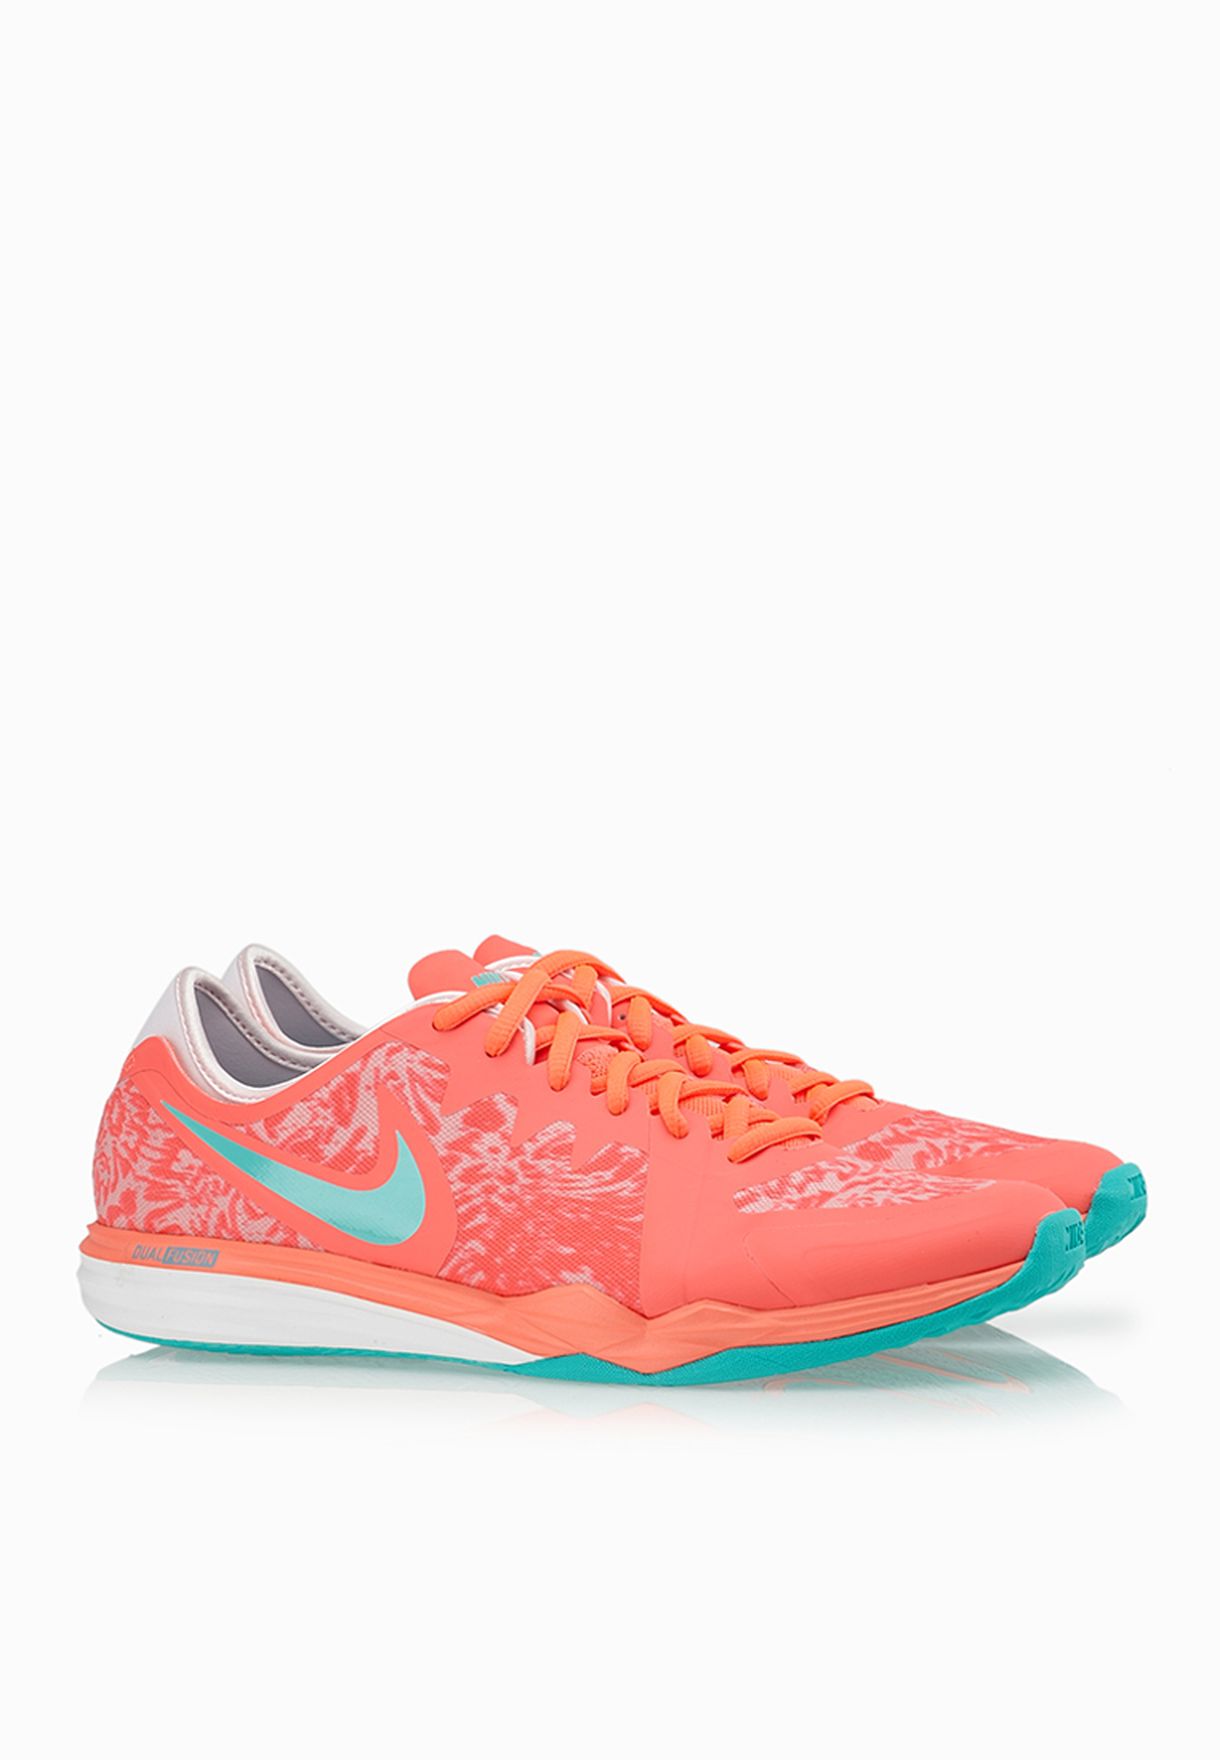 Mastermind passion Repair possible Buy Nike pink Dual Fusion TR 3 Print for Women in MENA, Worldwide